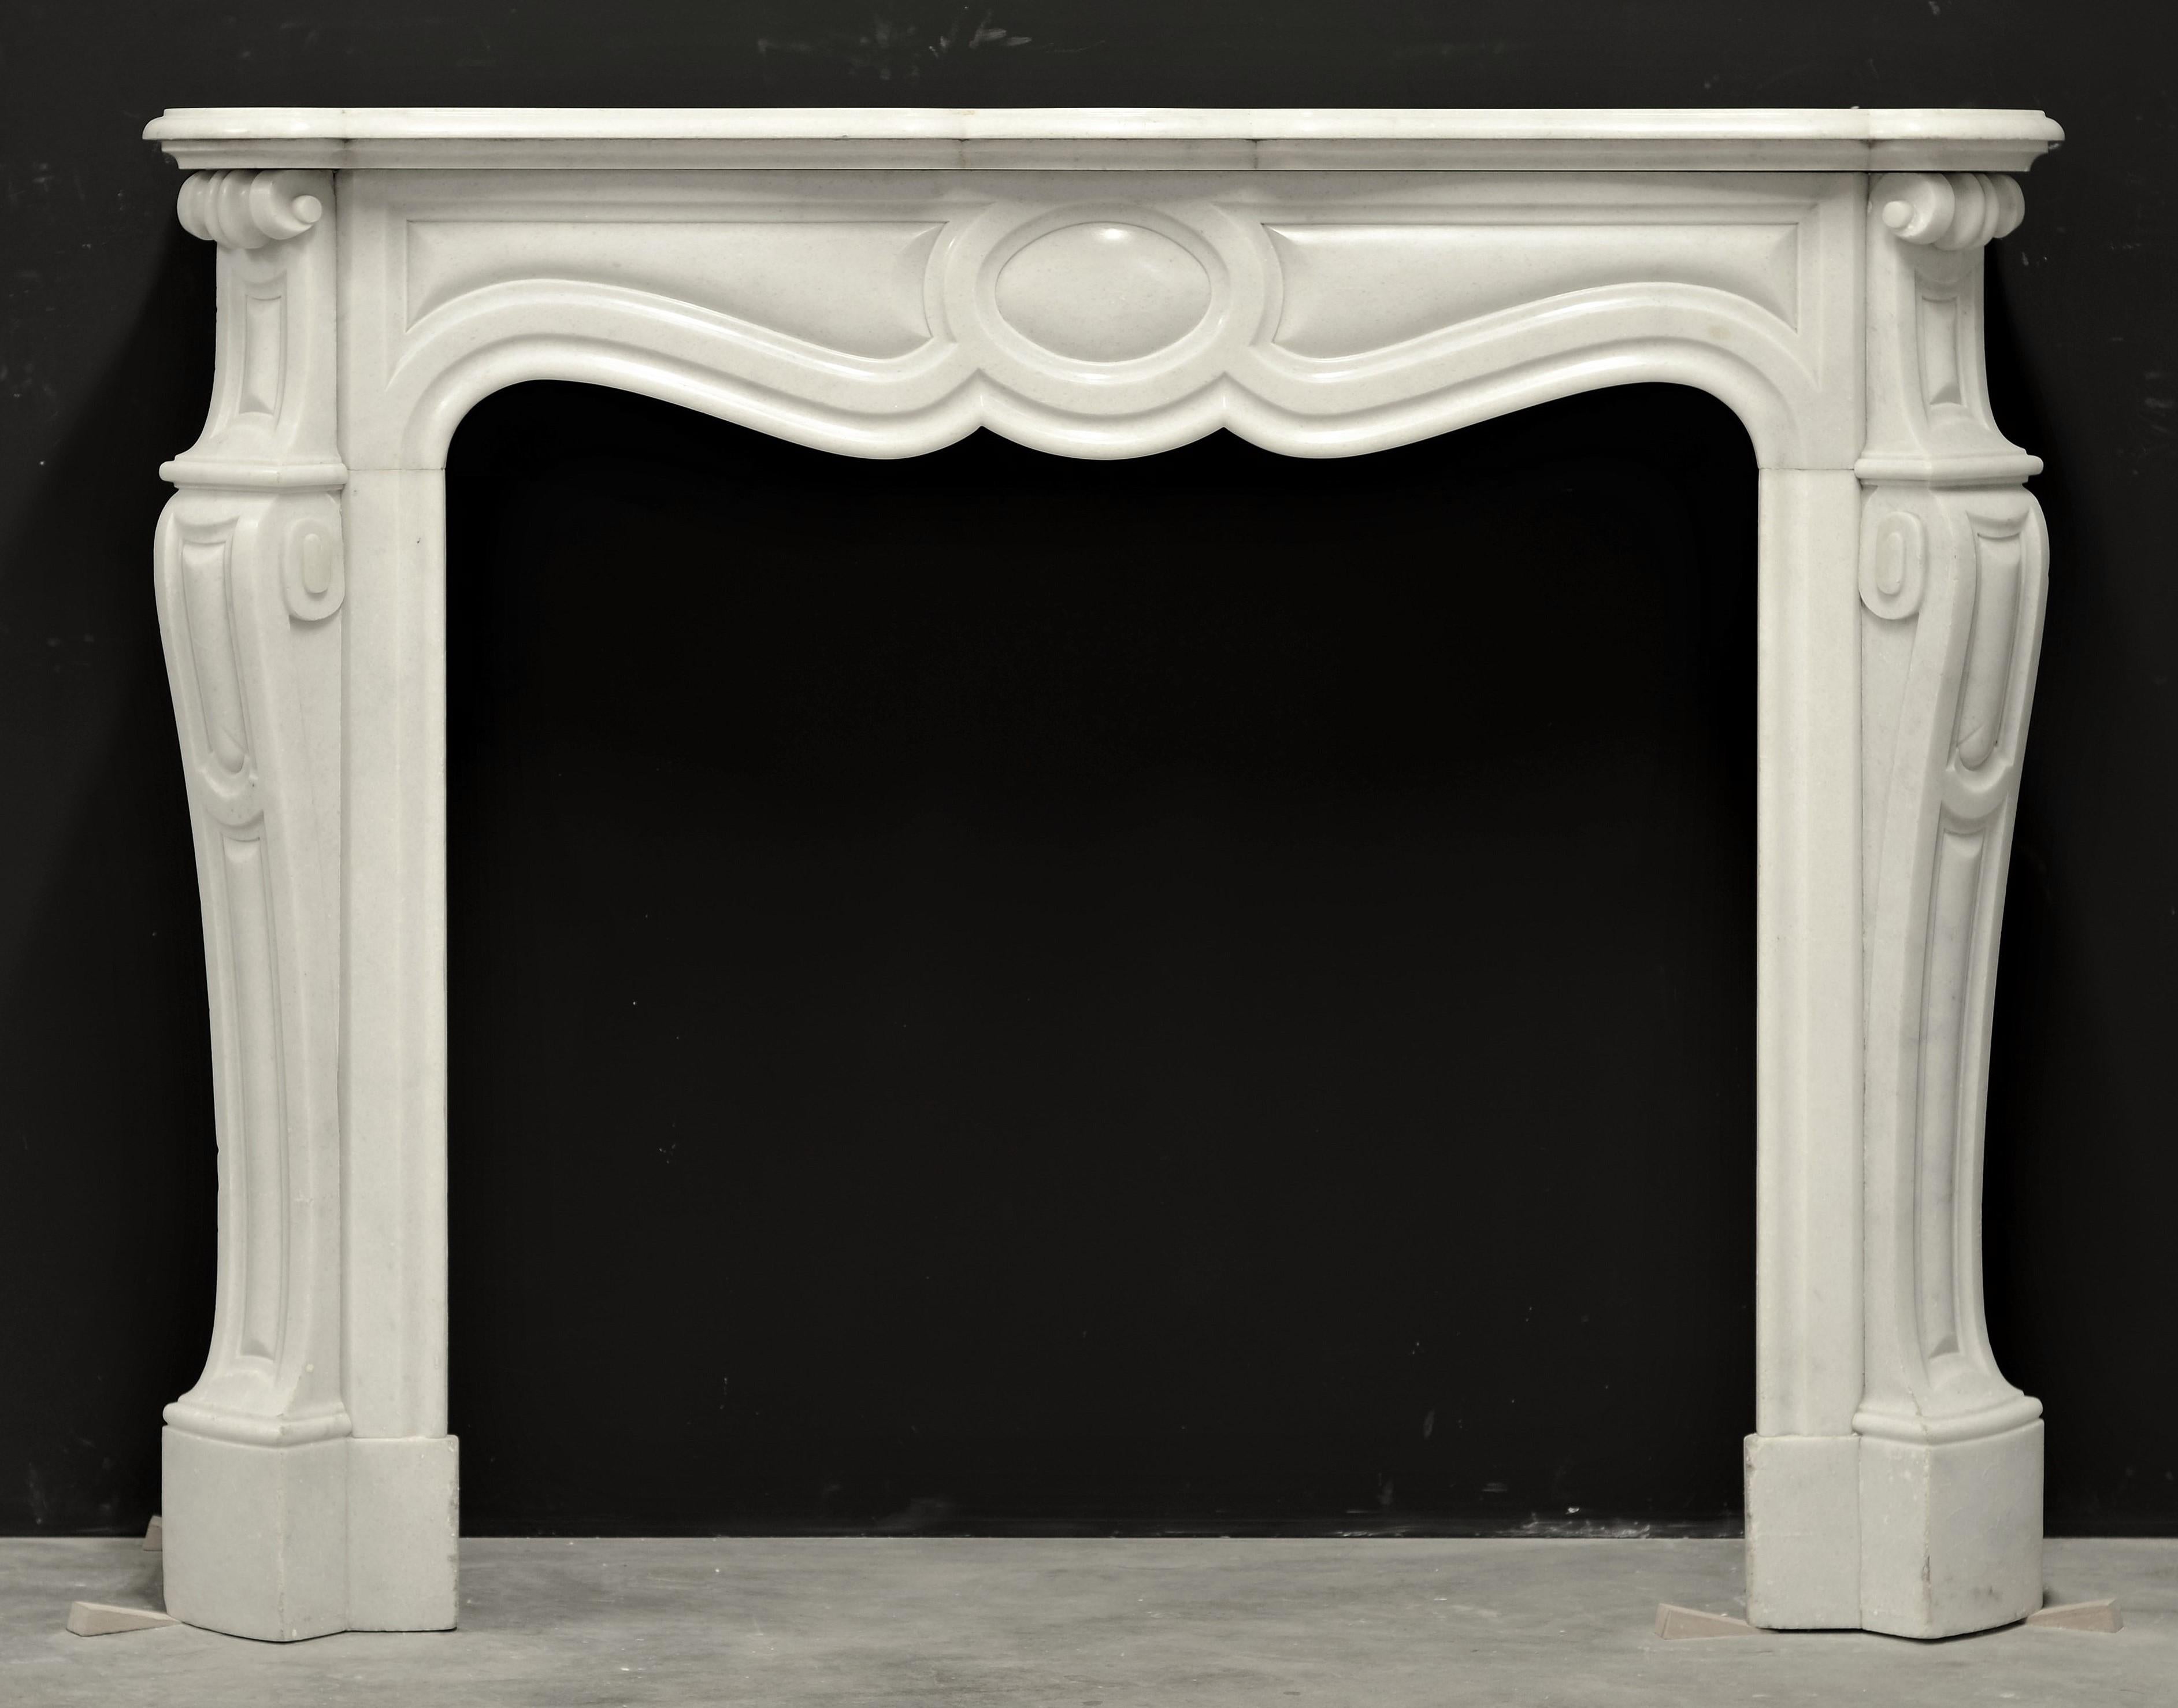 Beautiful, decorative and perfect sized French pompadour style fireplace mantel in white marble.
19th century, France.
Great condition, ready to be installed!

Sold by Schermerhorn Antique Fireplaces.
 
The overall measurements are:
Height:  41.34